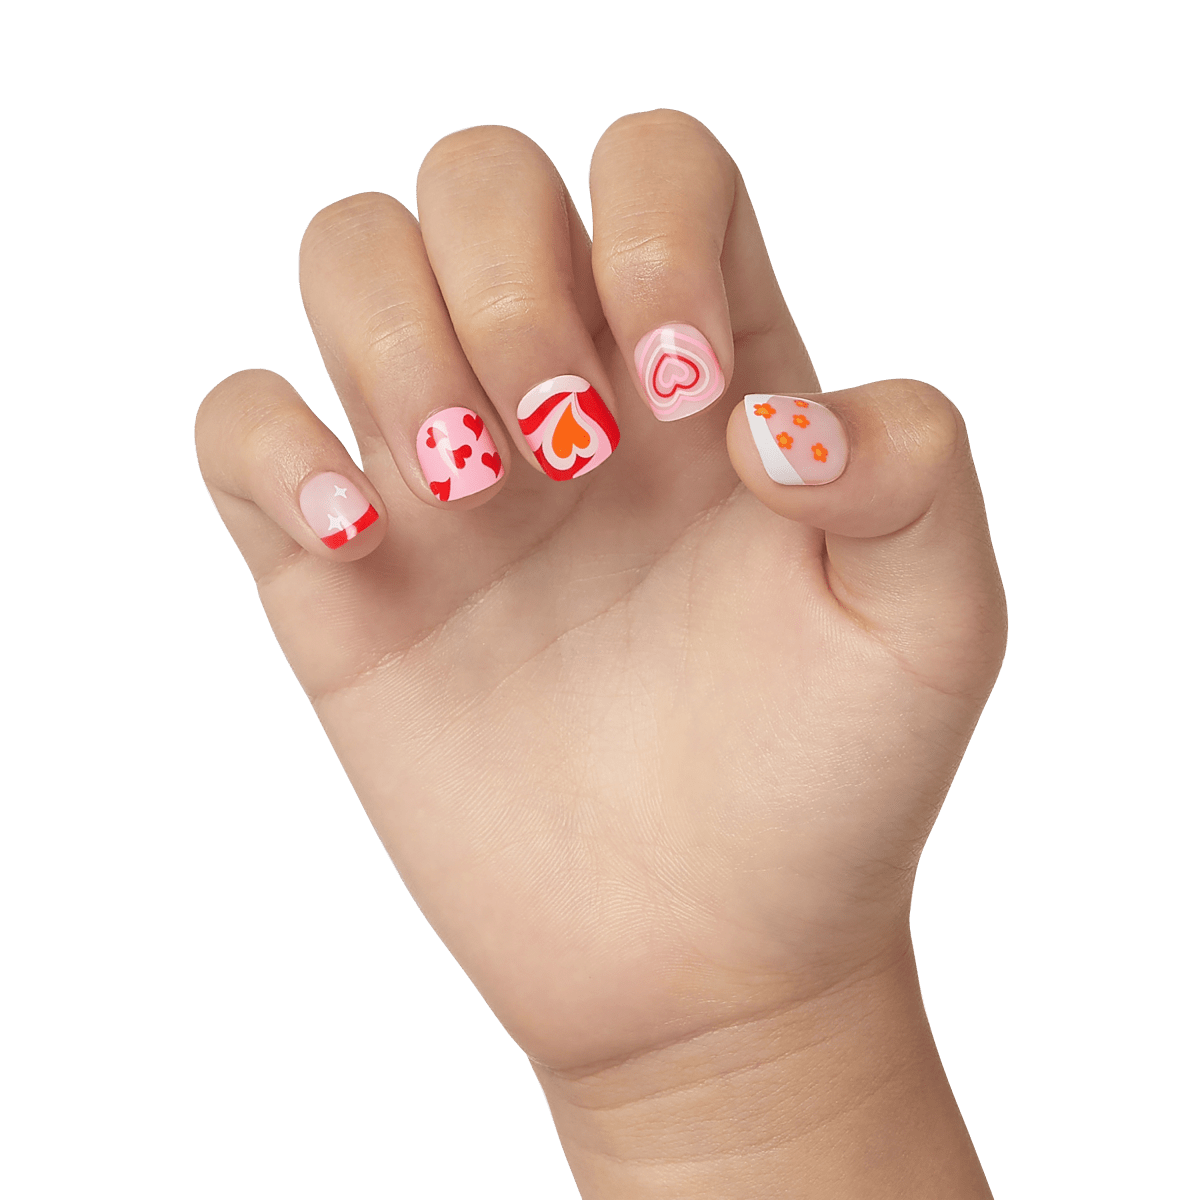 Cutest Nail Design Ideas for Kids | Hello there! Have you gu… | Flickr